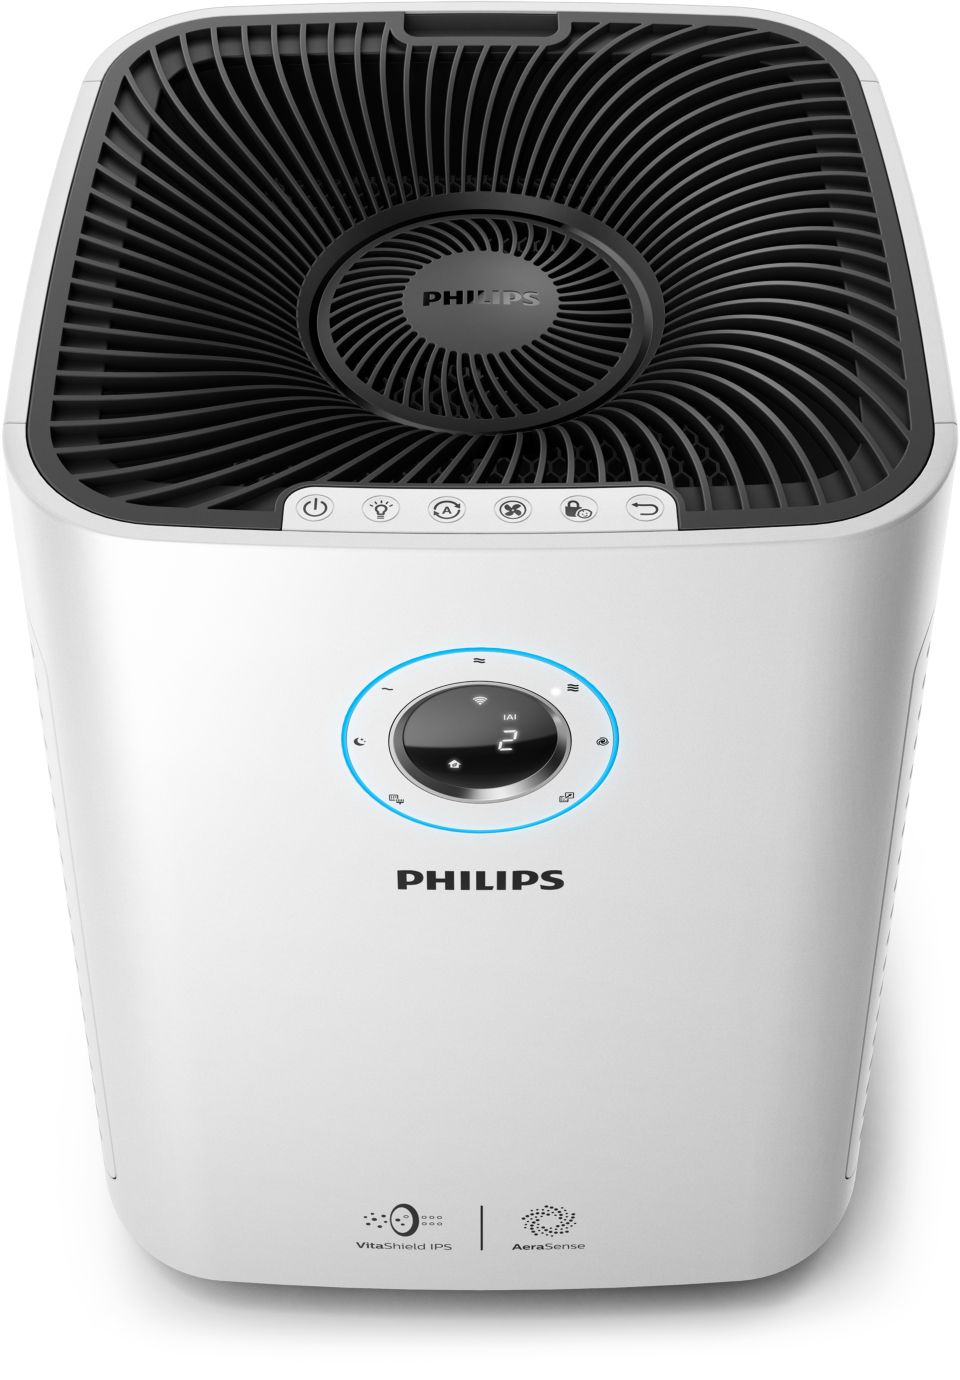 Philips 5000i review